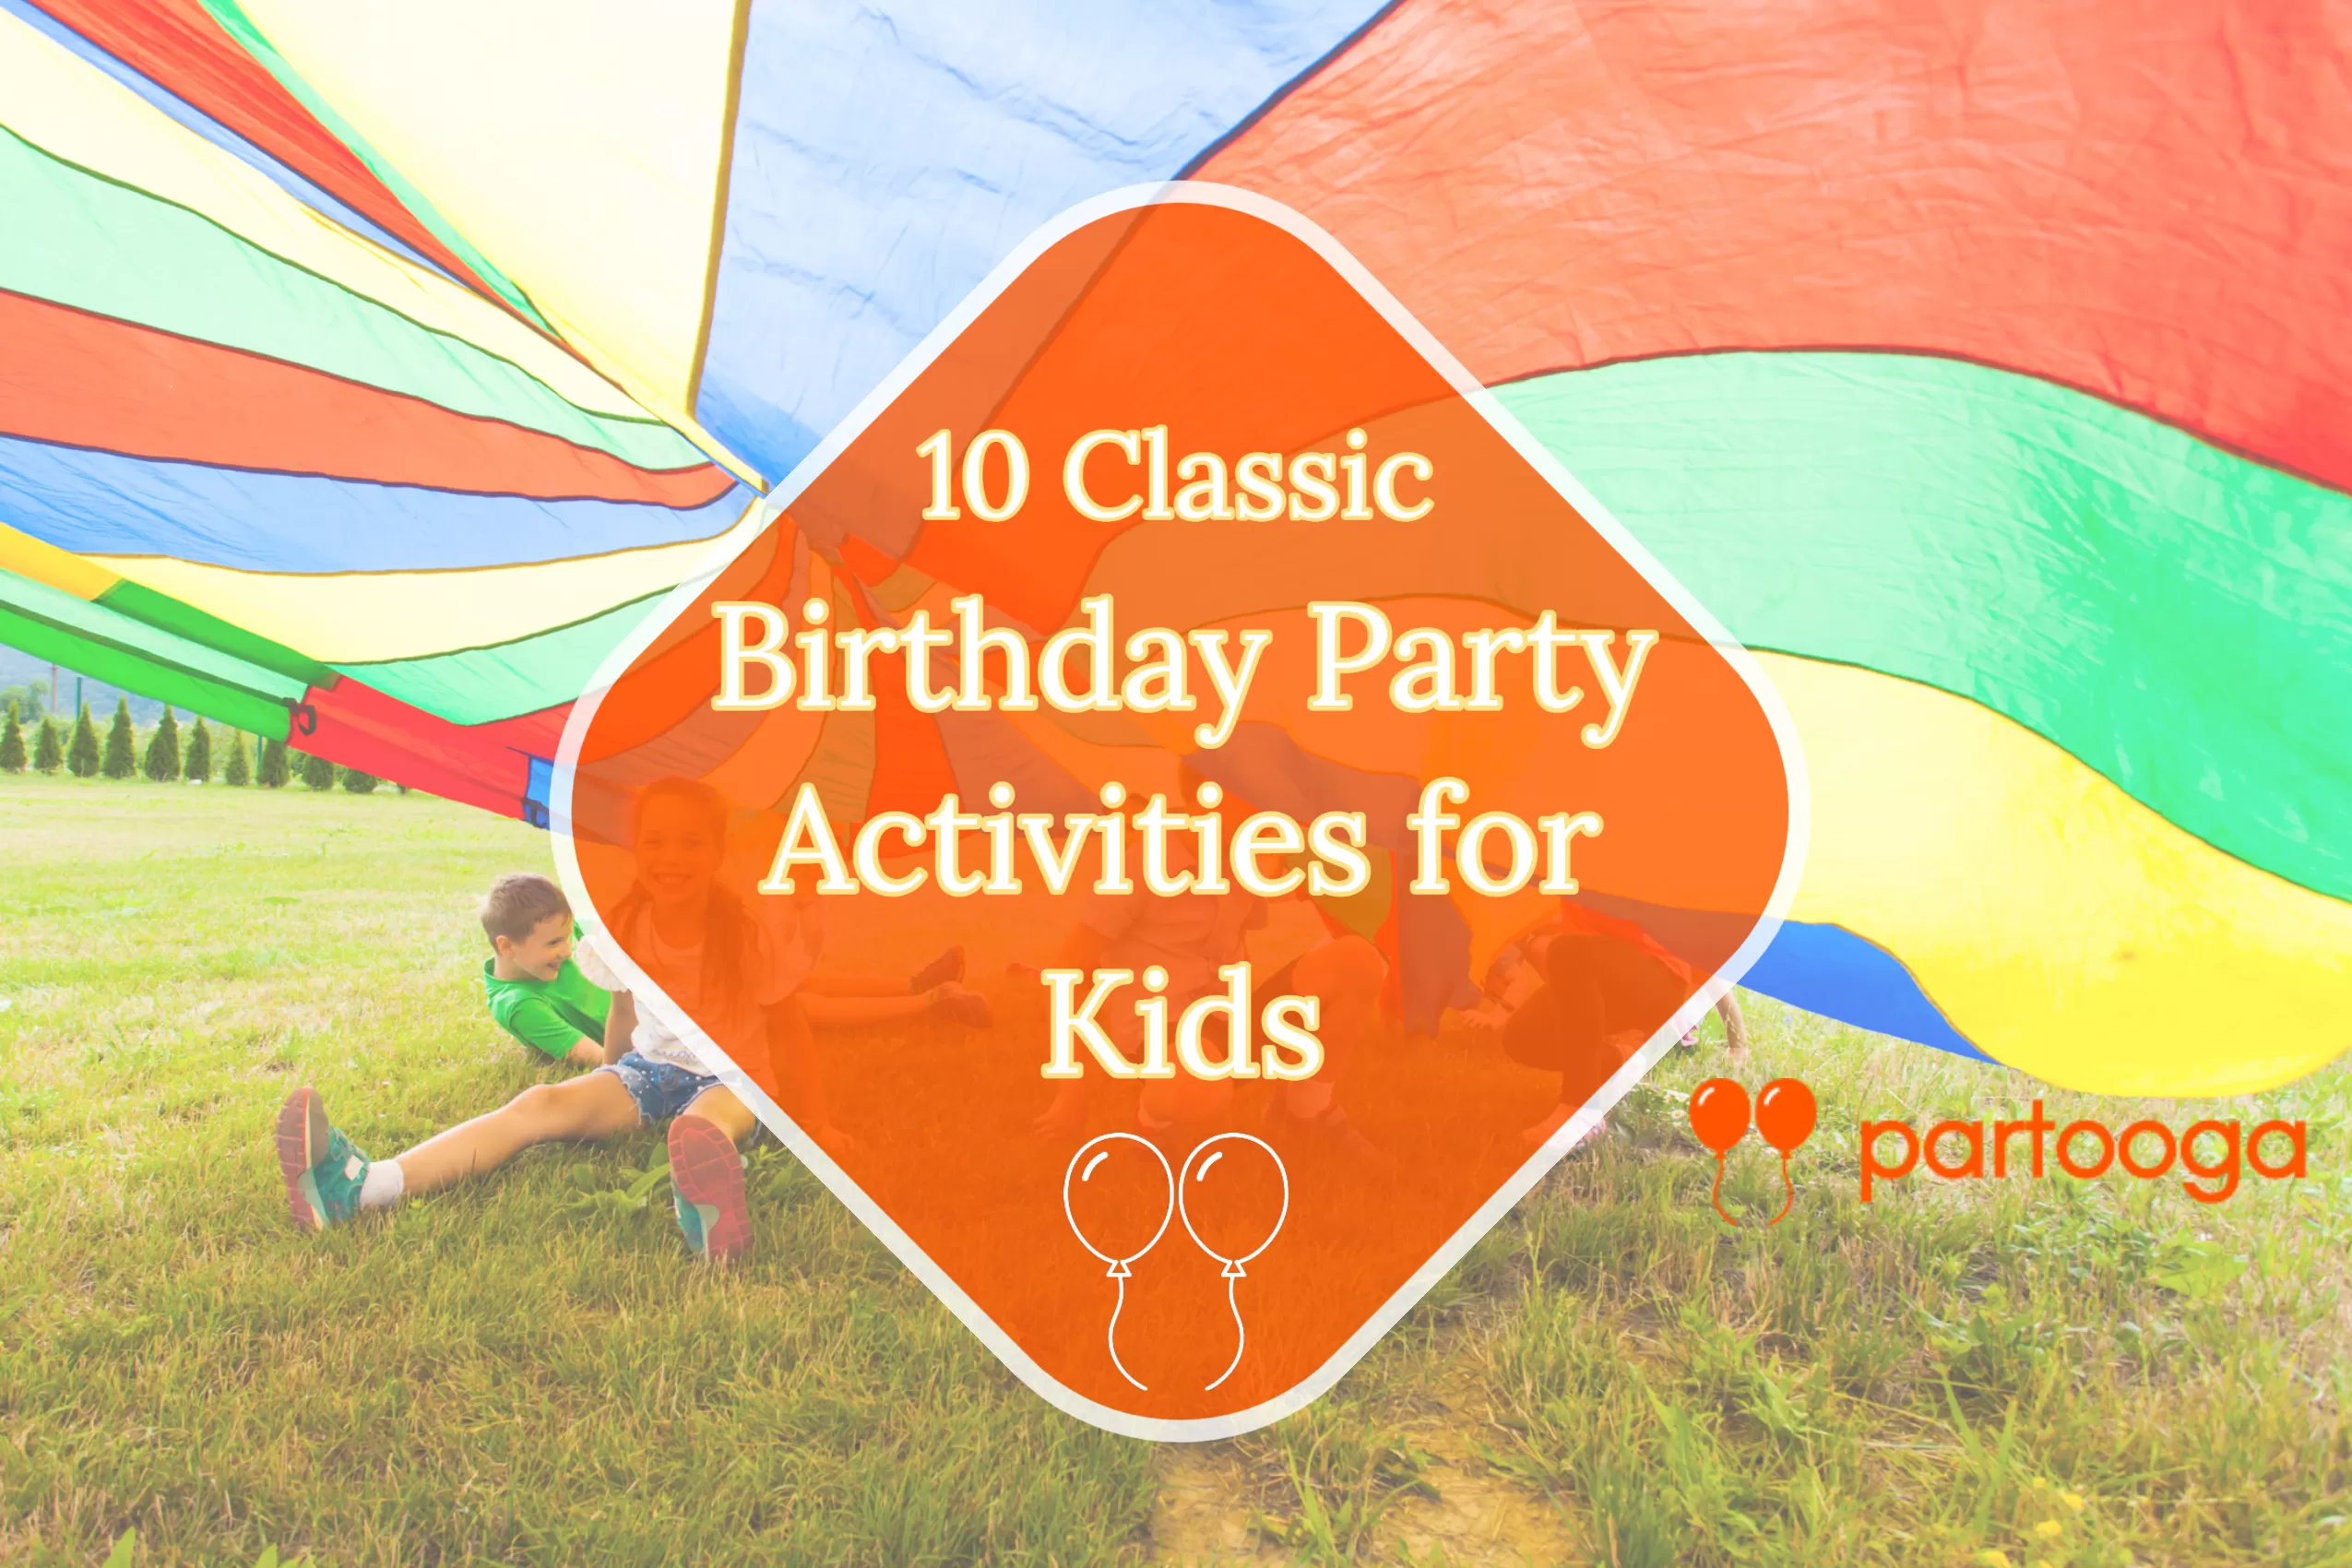 10 Classic Birthday Party Activities for Kids brought to you by Partooga.